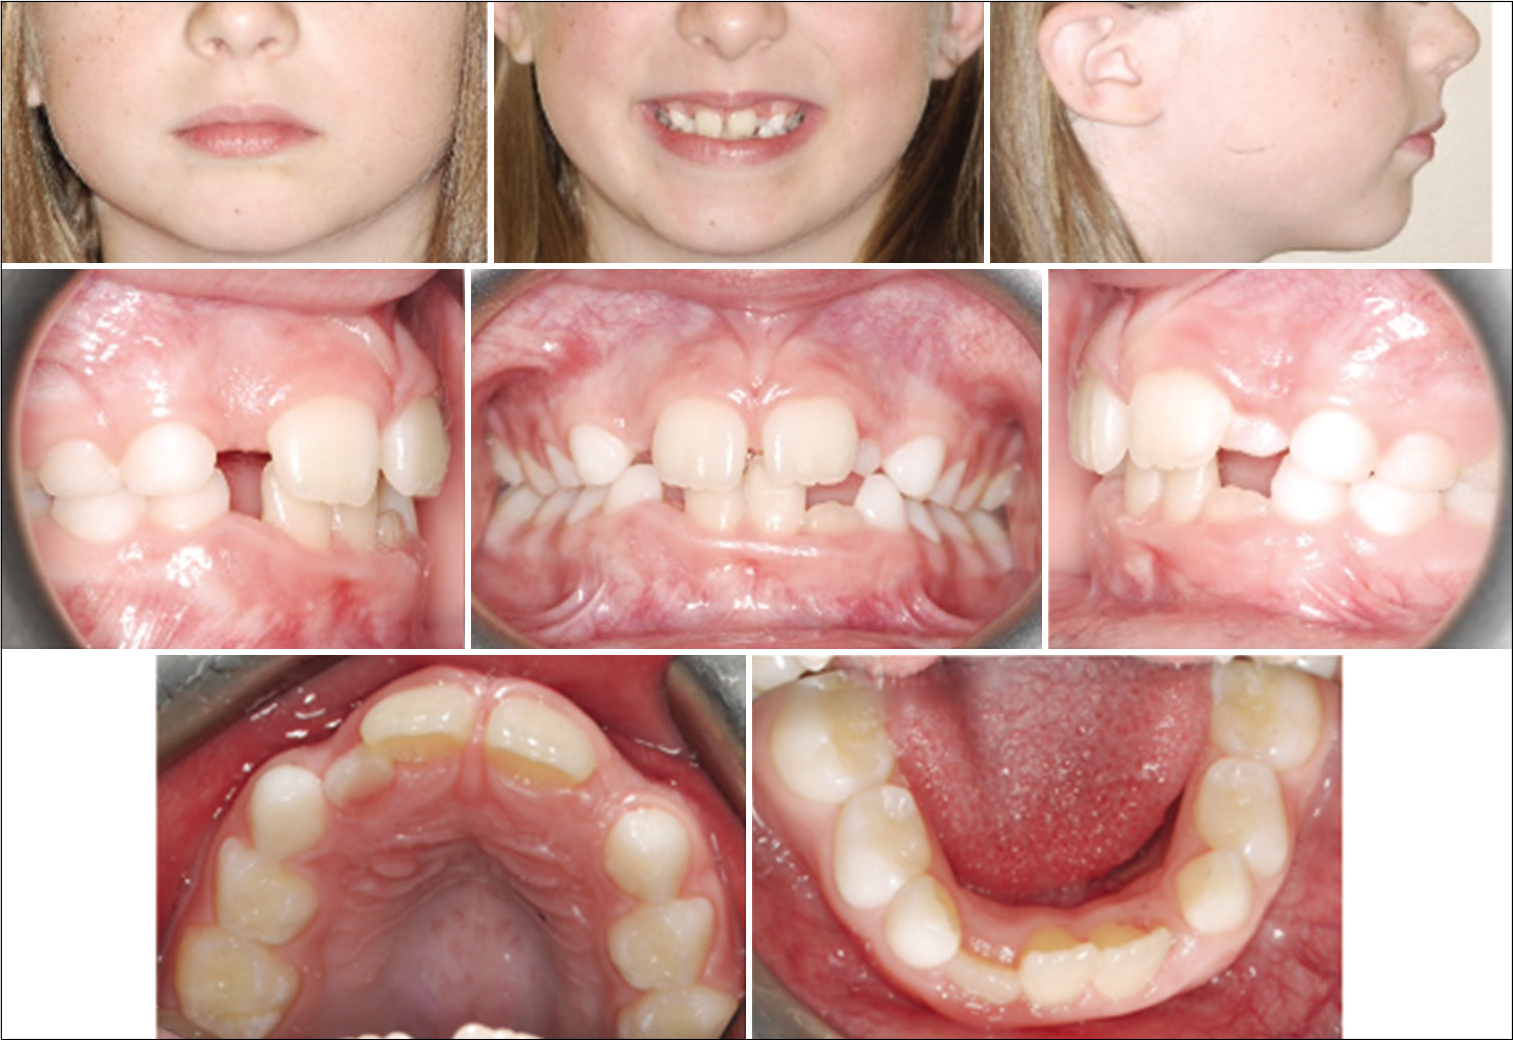 Case 1 pre-treatment facial and intraoral photographs. An 8-year-old female with crowding in the upper anterior teeth.